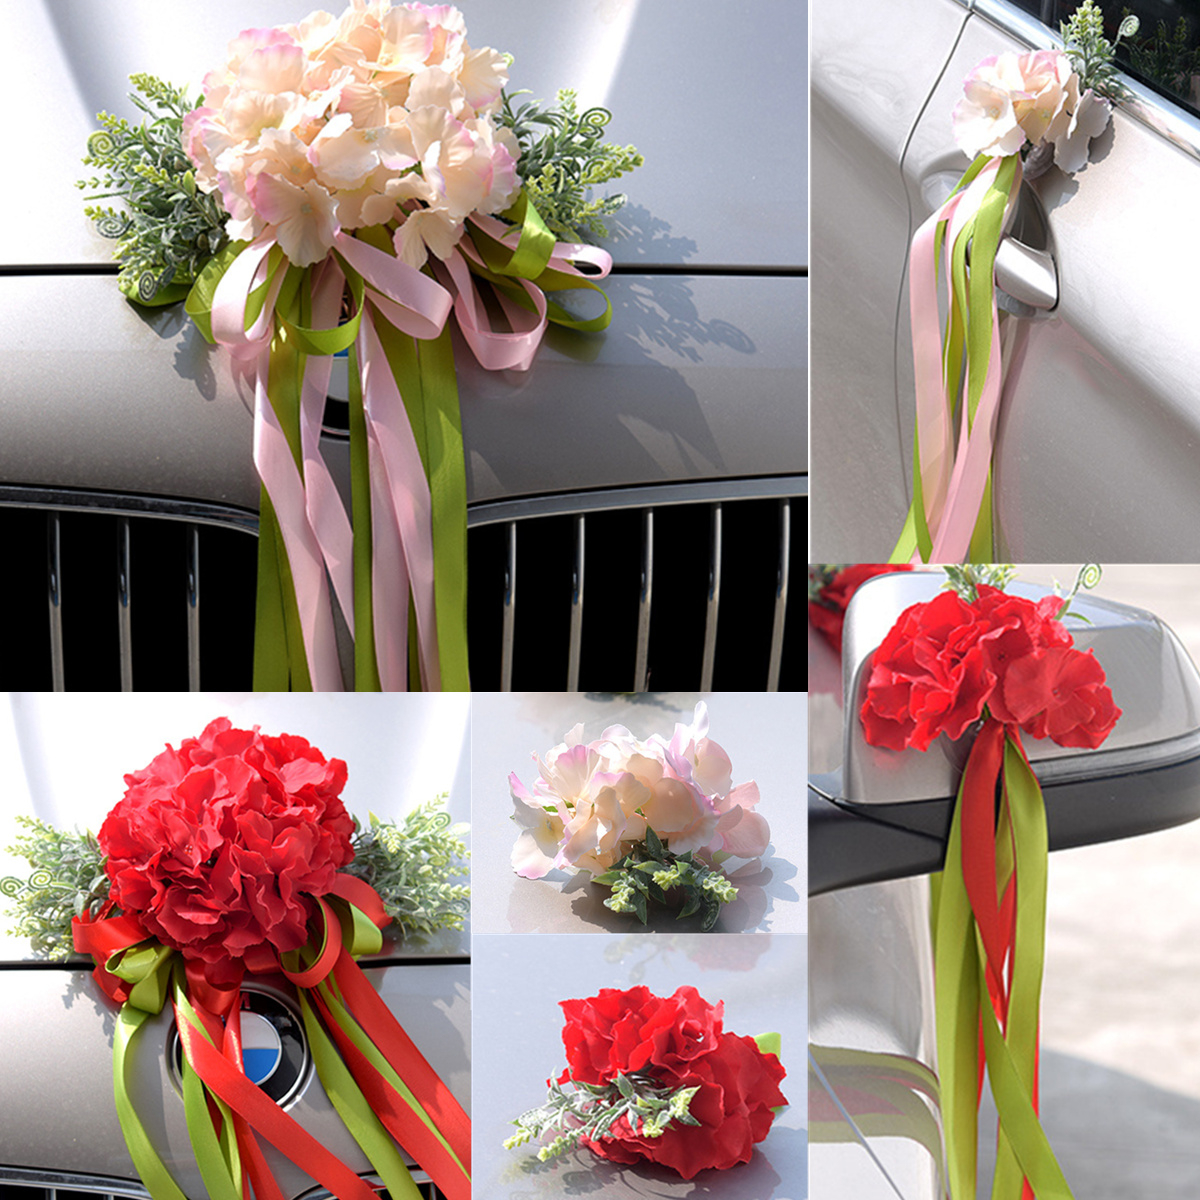 Wedding Car Flower 5M Ribbons Plate 10 Bows Door Handle Rearview Set Decorations 